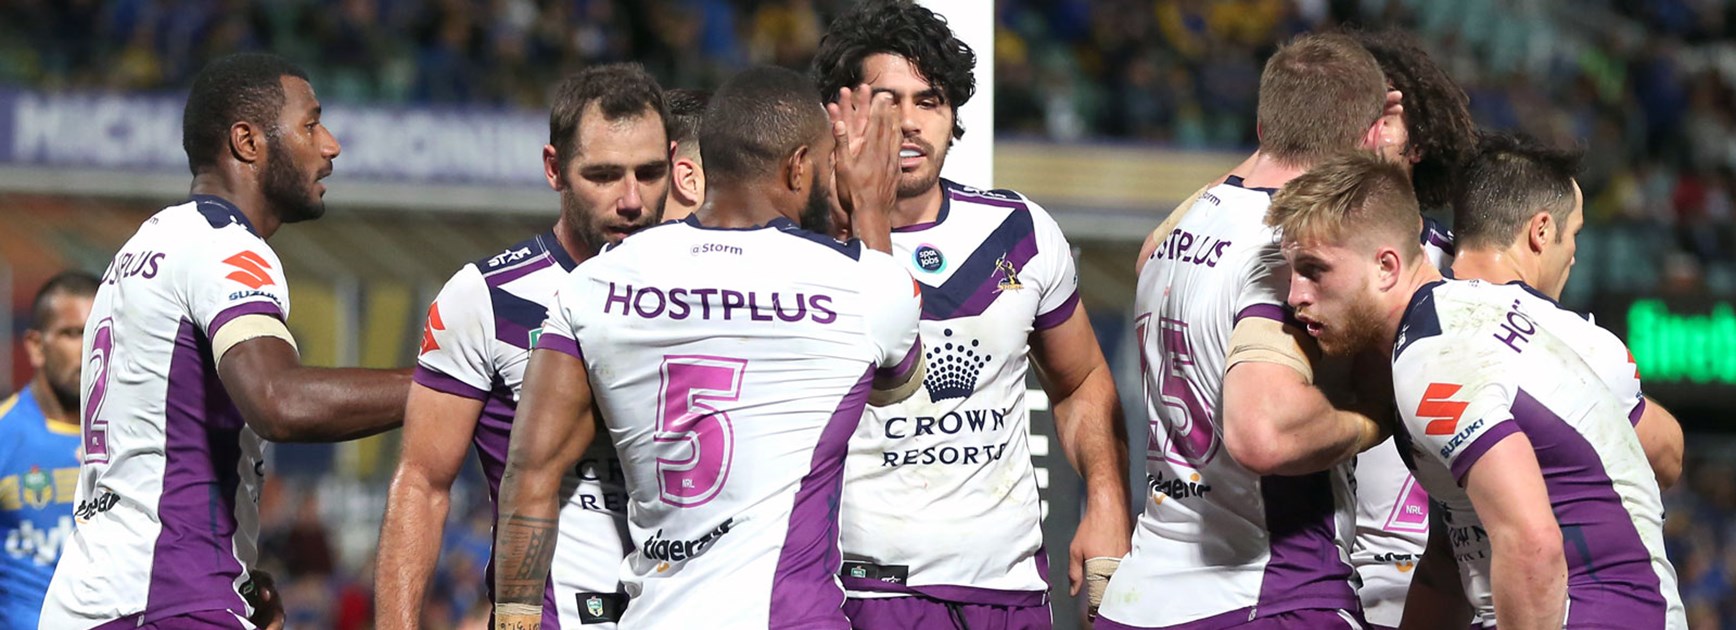 The Storm's depth helped them overcome a horror injury toll to finish the season in top spot according to Cameron Smith.